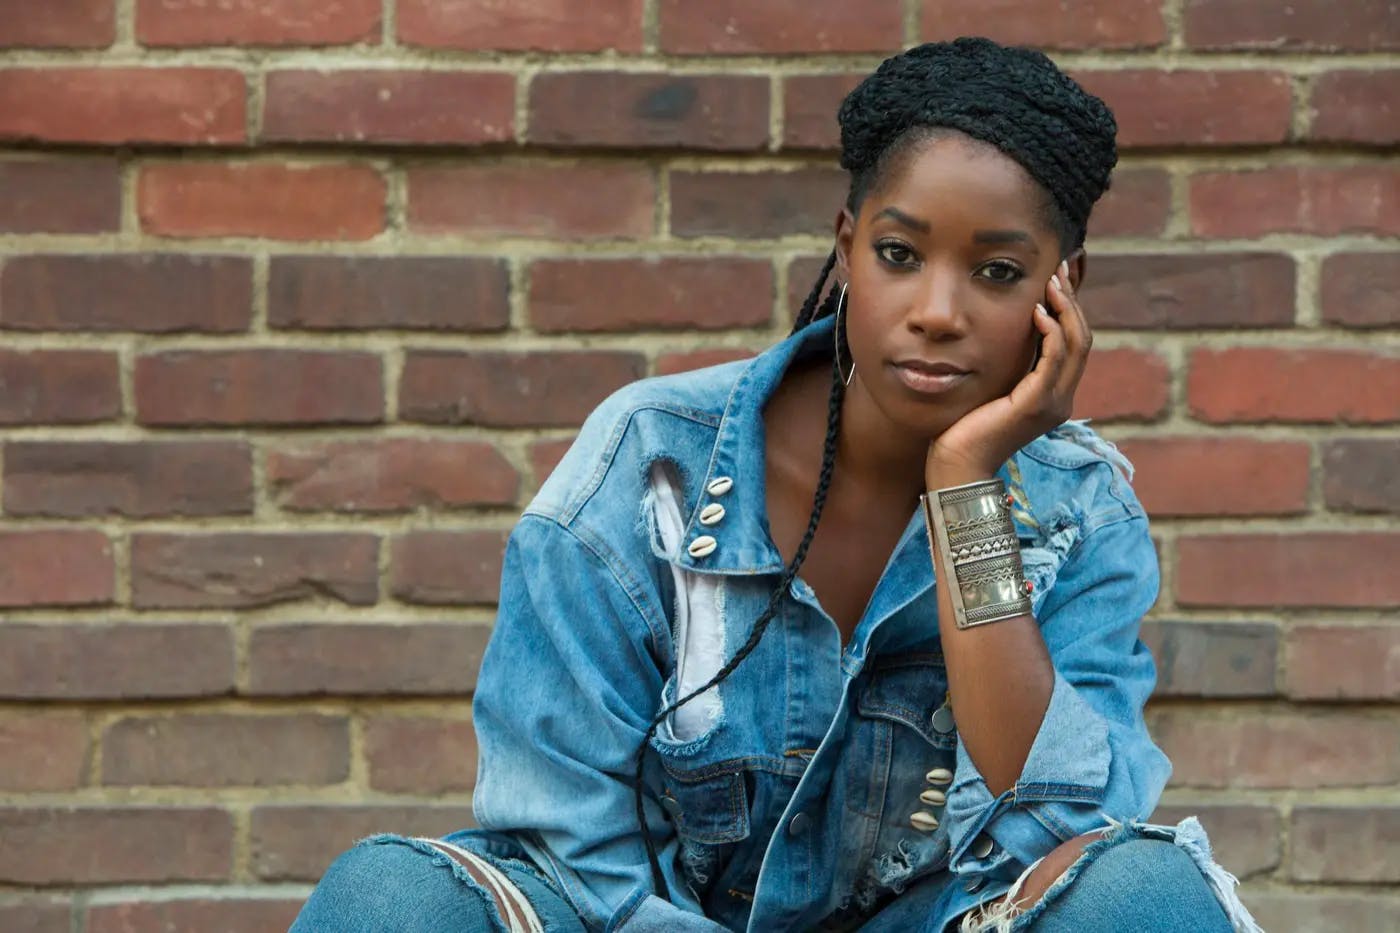 Joelle Brooks (Ashley Blaine Featherson) sits casually in front of a brick wall, her elbow resting on her knee and cupping her face.  She wears ripped jeans and a denim jacket decorated with shells on the collar and pocket.  A chunky bronze cuff bracelet adorns her wrist, complementing her large hoop earrings.